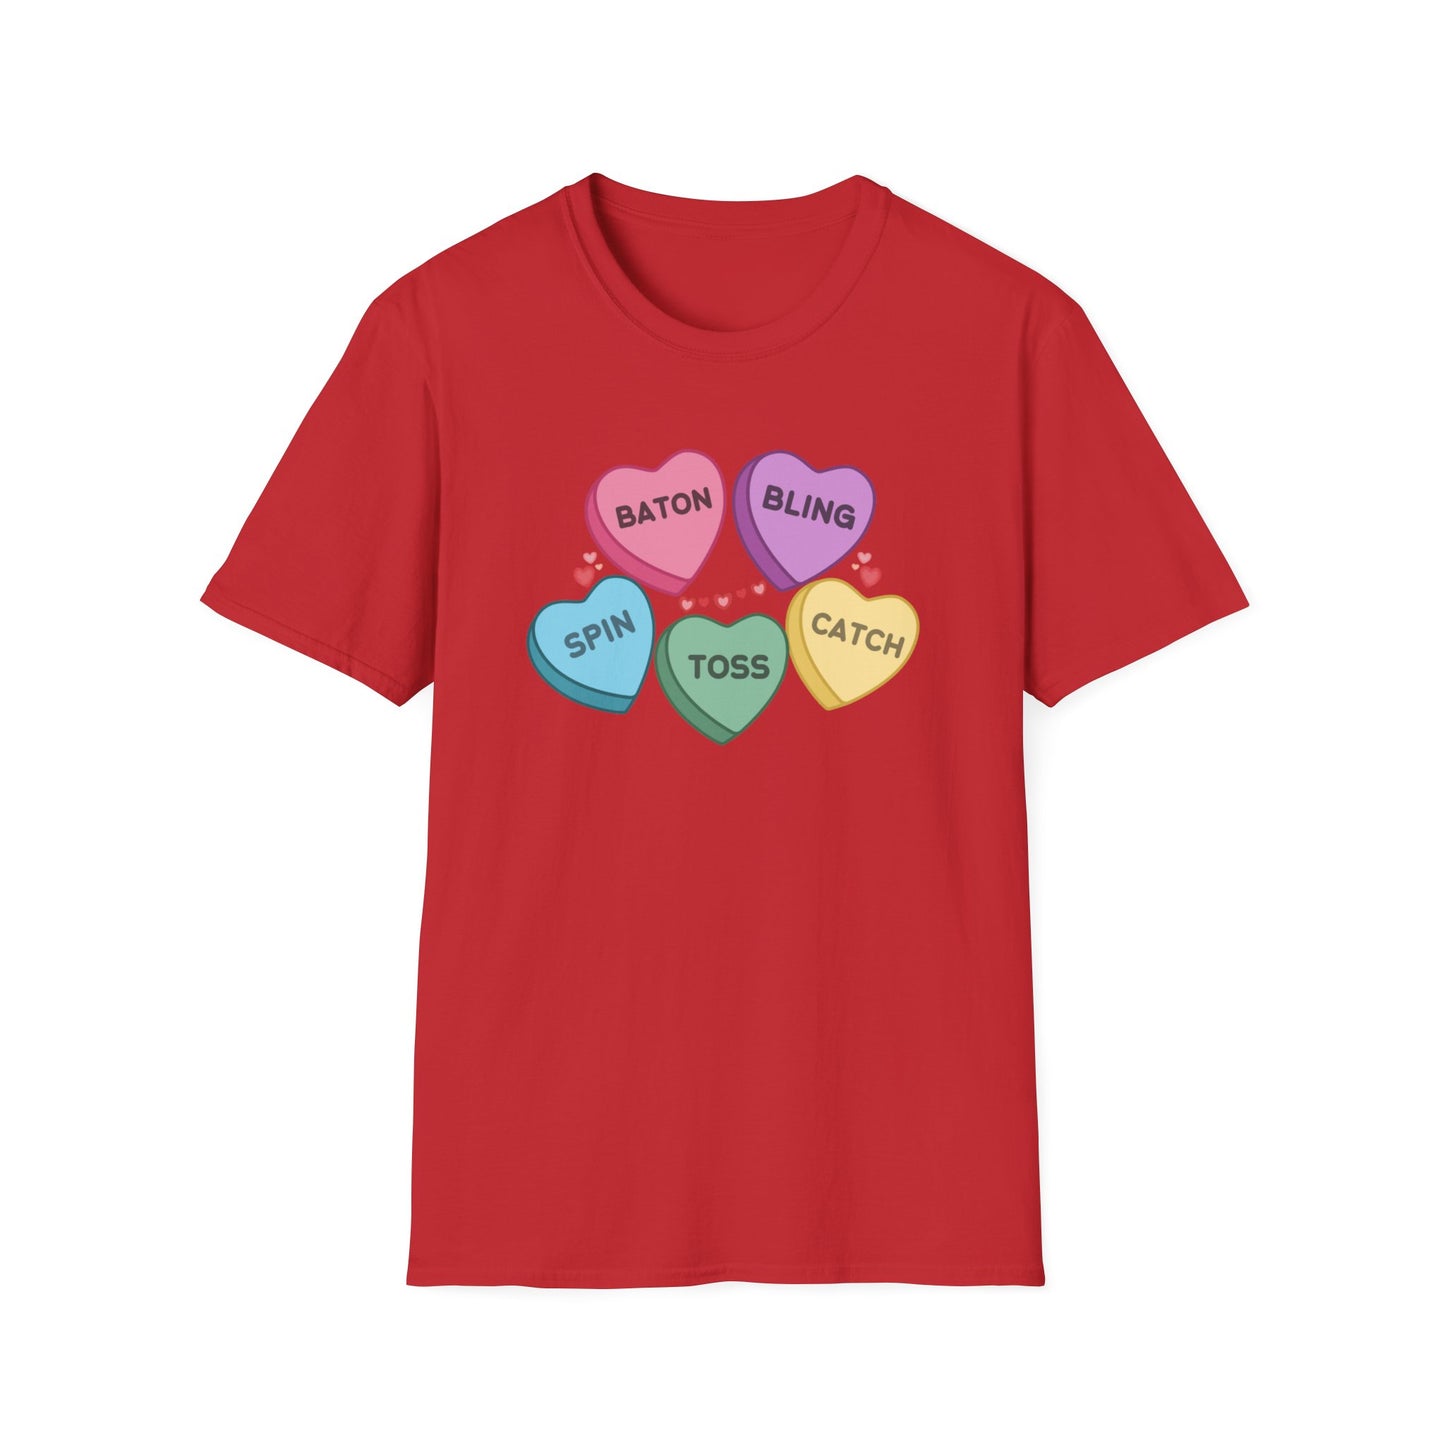 Candy Hearts Twirler Unisex Softstyle T-Shirt, Baton Twirler Valentines Day T-Shirt, Gift for Her for Valentines Day